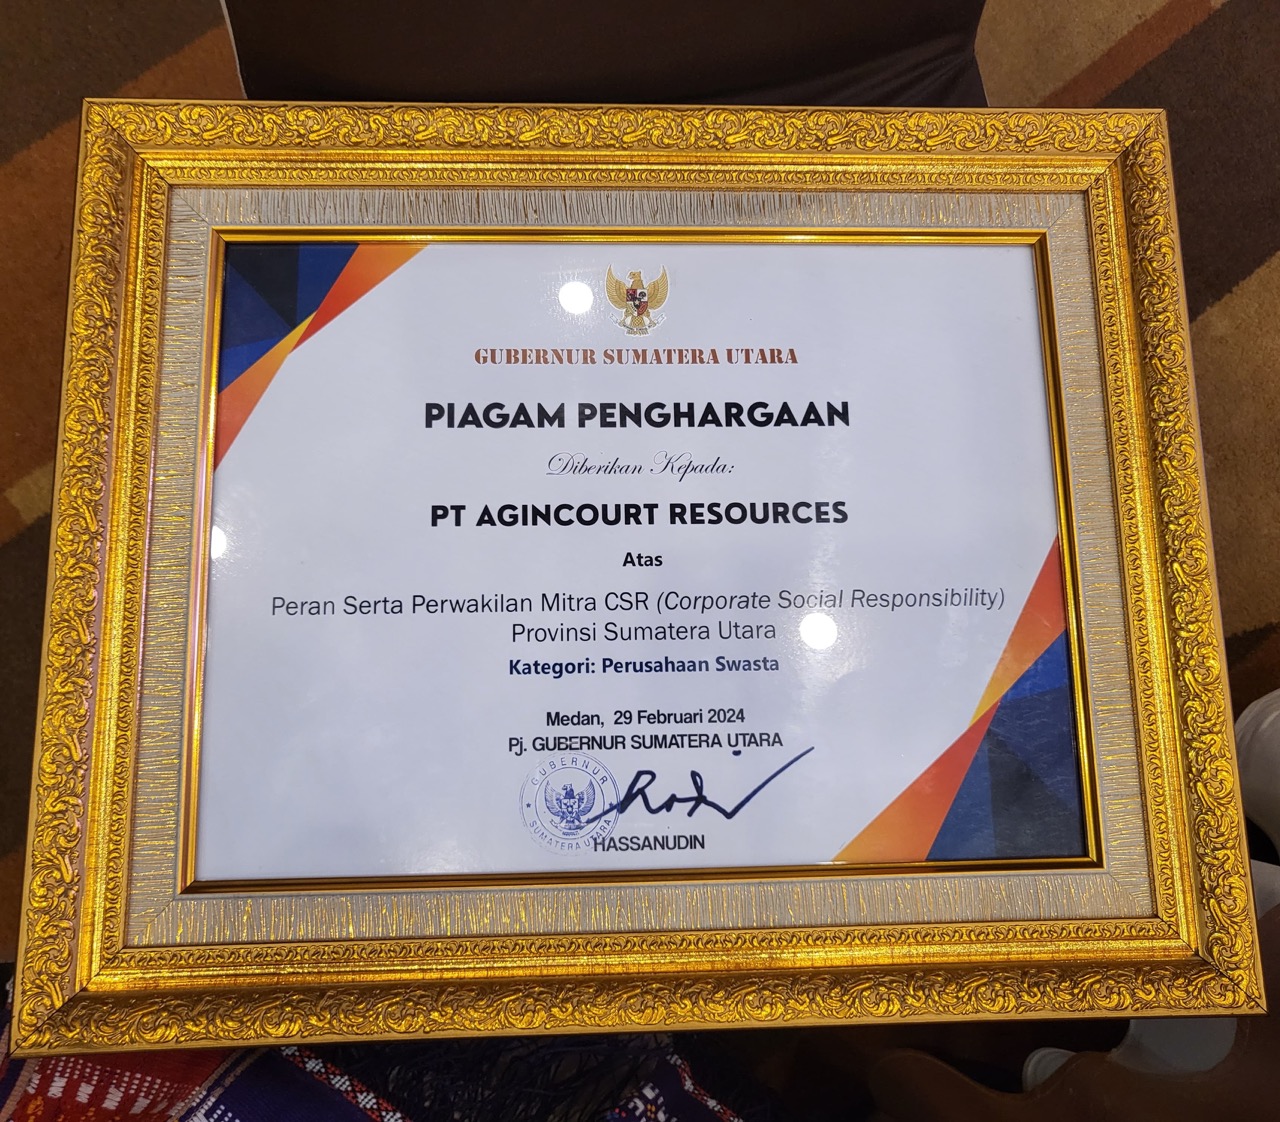 Agincourt Resources' Contribution to the Community Received Award at North Sumatra Province Development Planning Forum